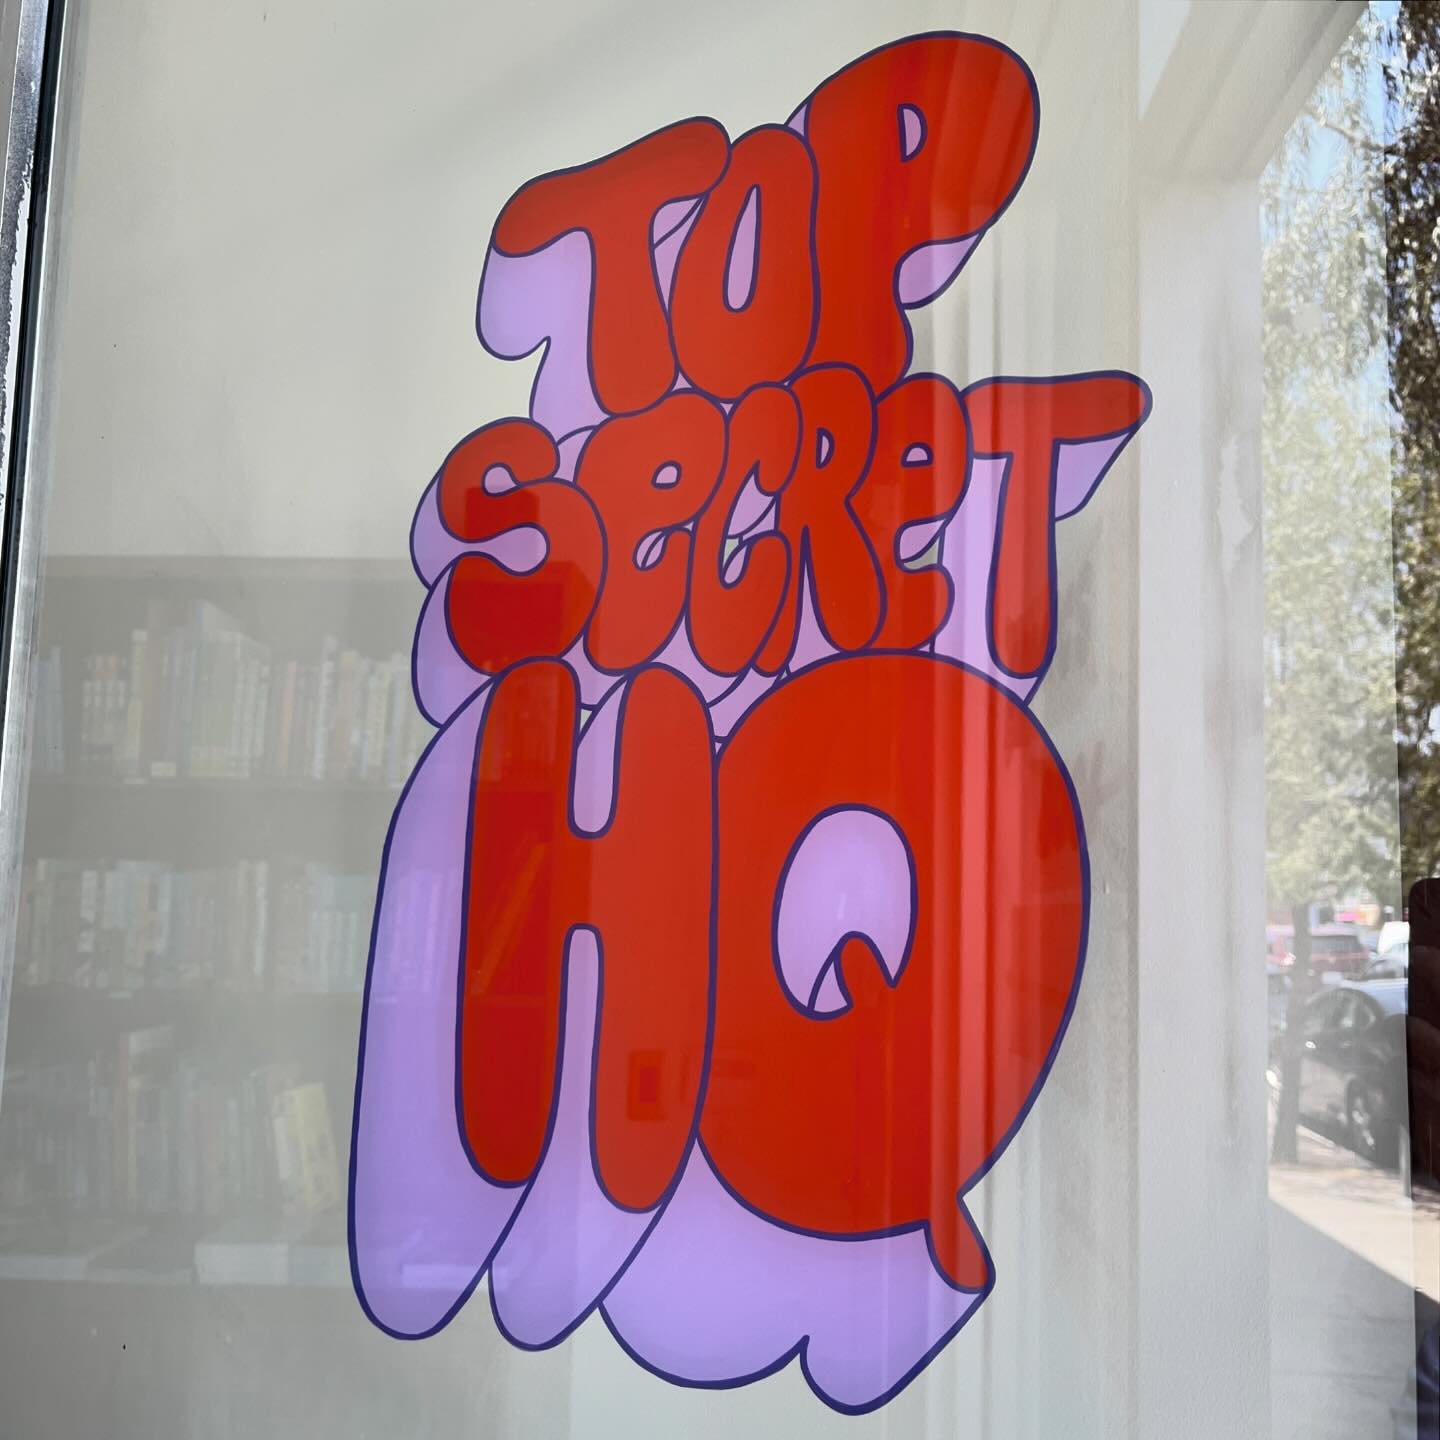 Hey World, we&rsquo;re back on Sunset Blvd! Today we&rsquo;re opening our second location! Top Secret Headquarters is now in Echo Park at 1816 W Sunset Blvd and we couldn&rsquo;t be more excited! We&rsquo;re a bit of a work in progress at the moment.